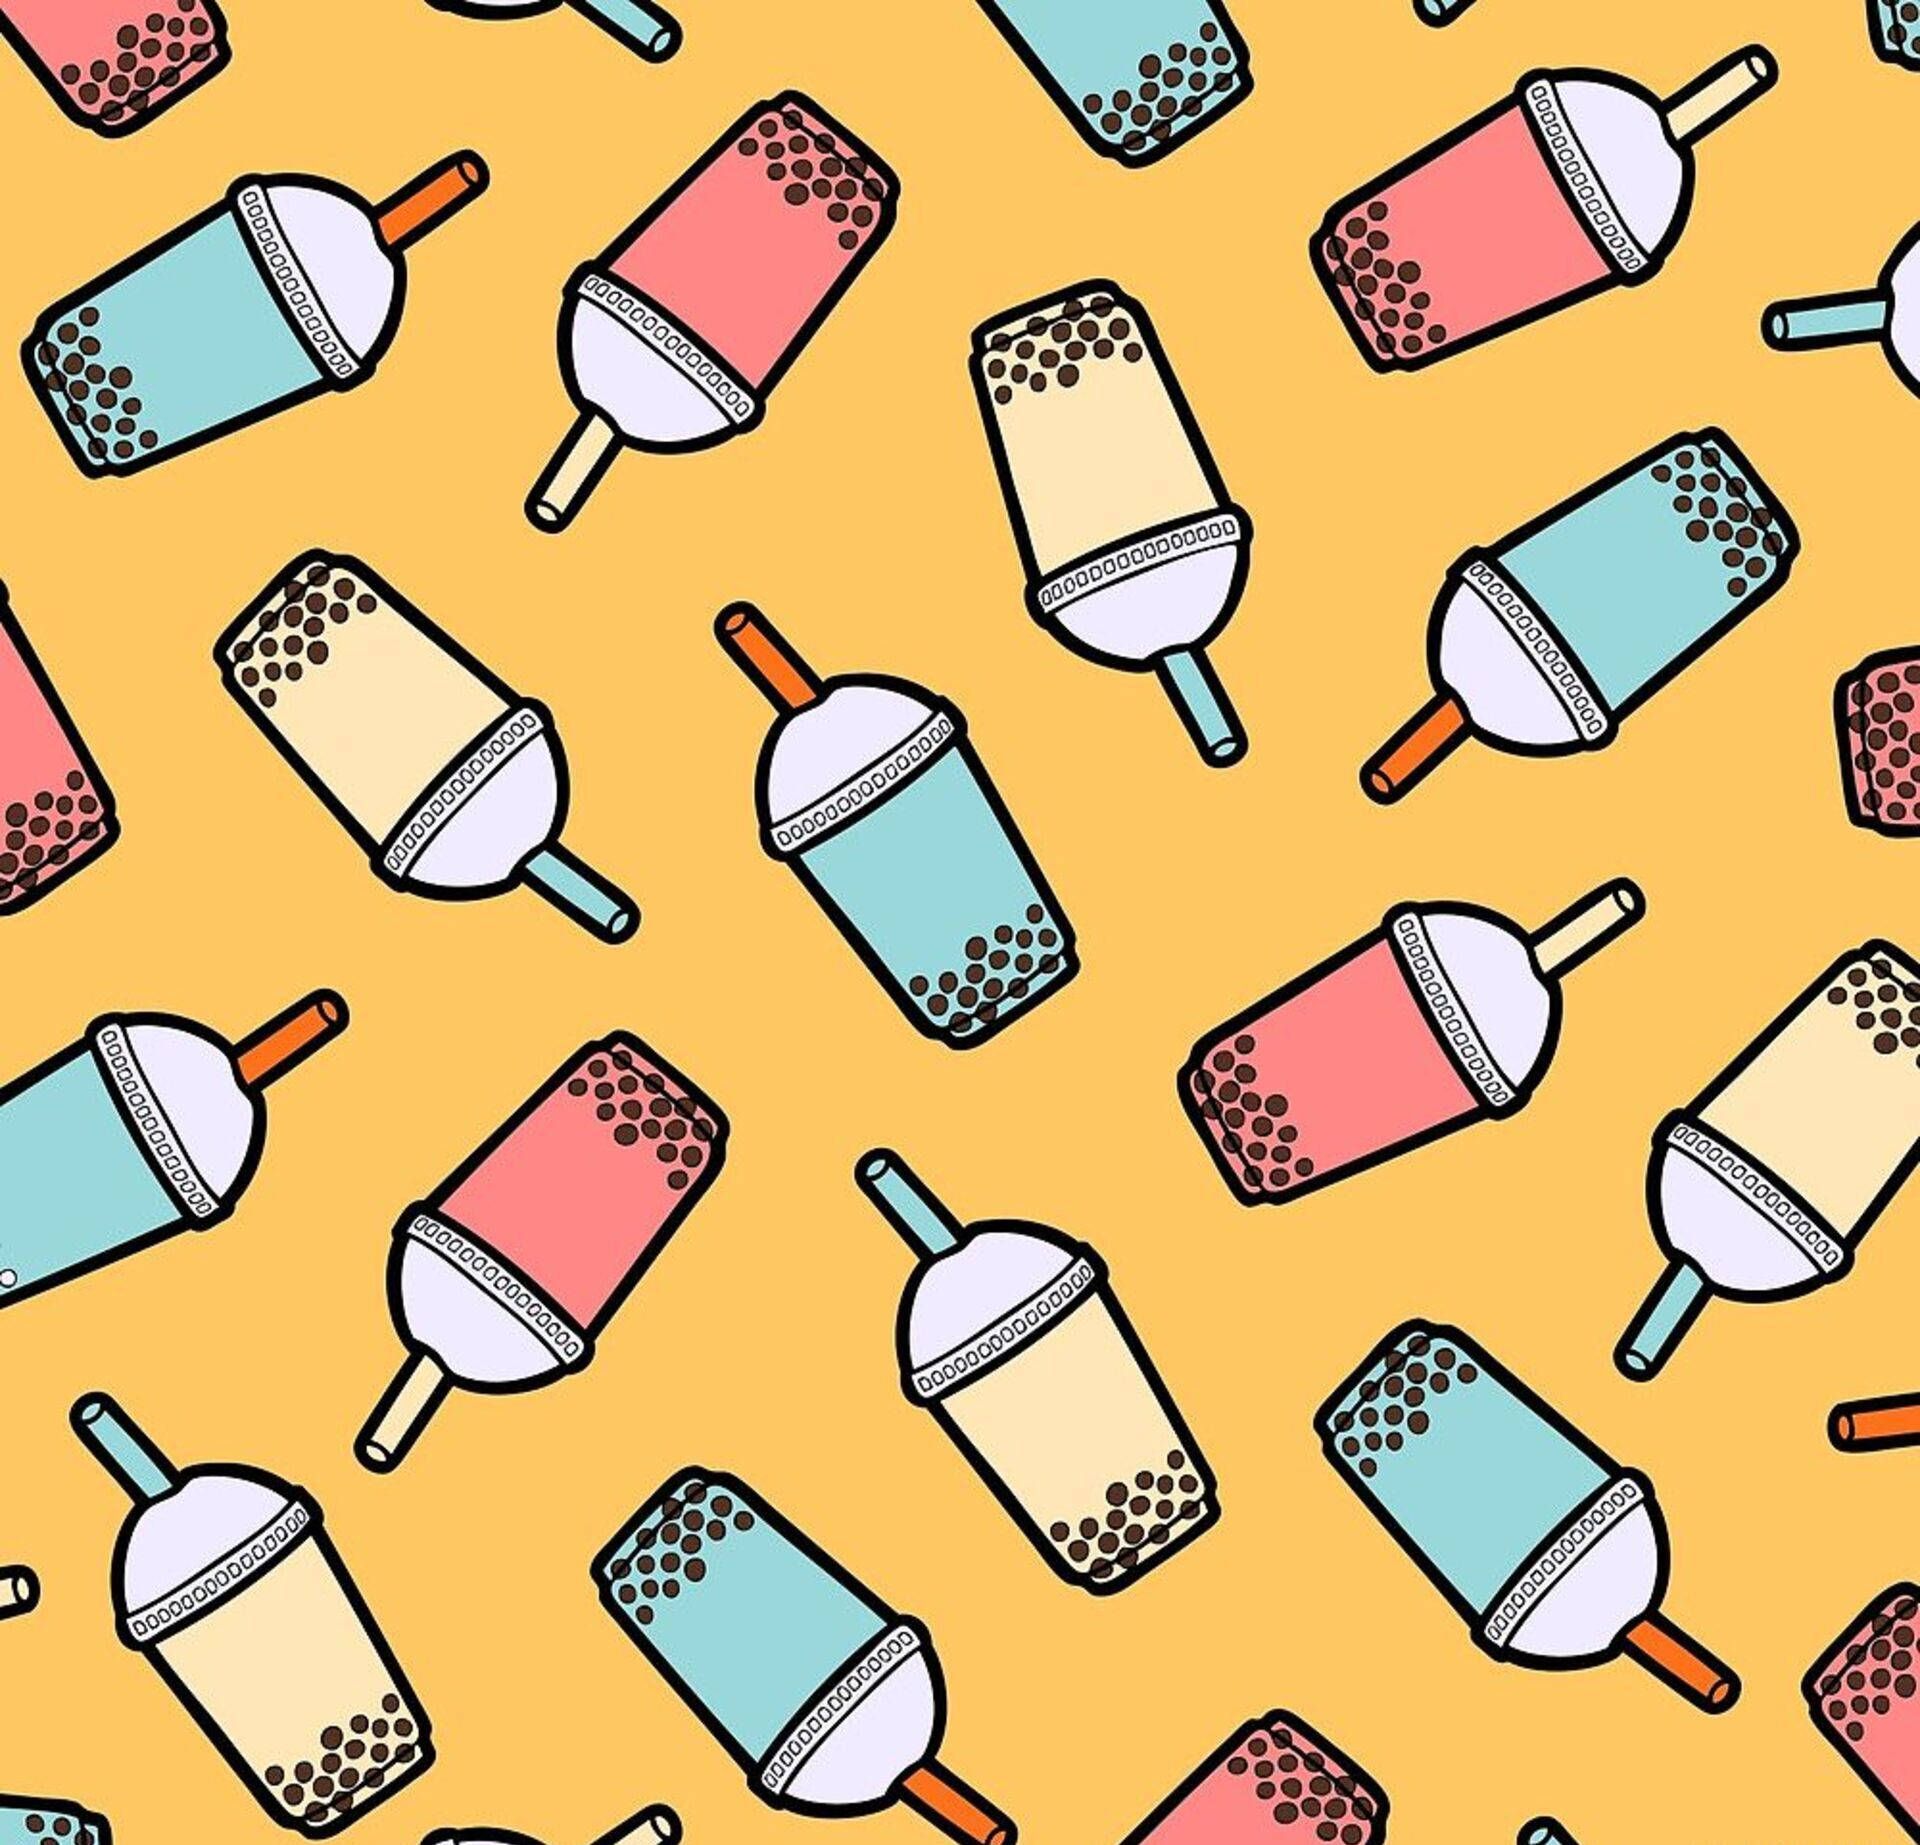 A pattern of boba drinks on yellow background - Boba